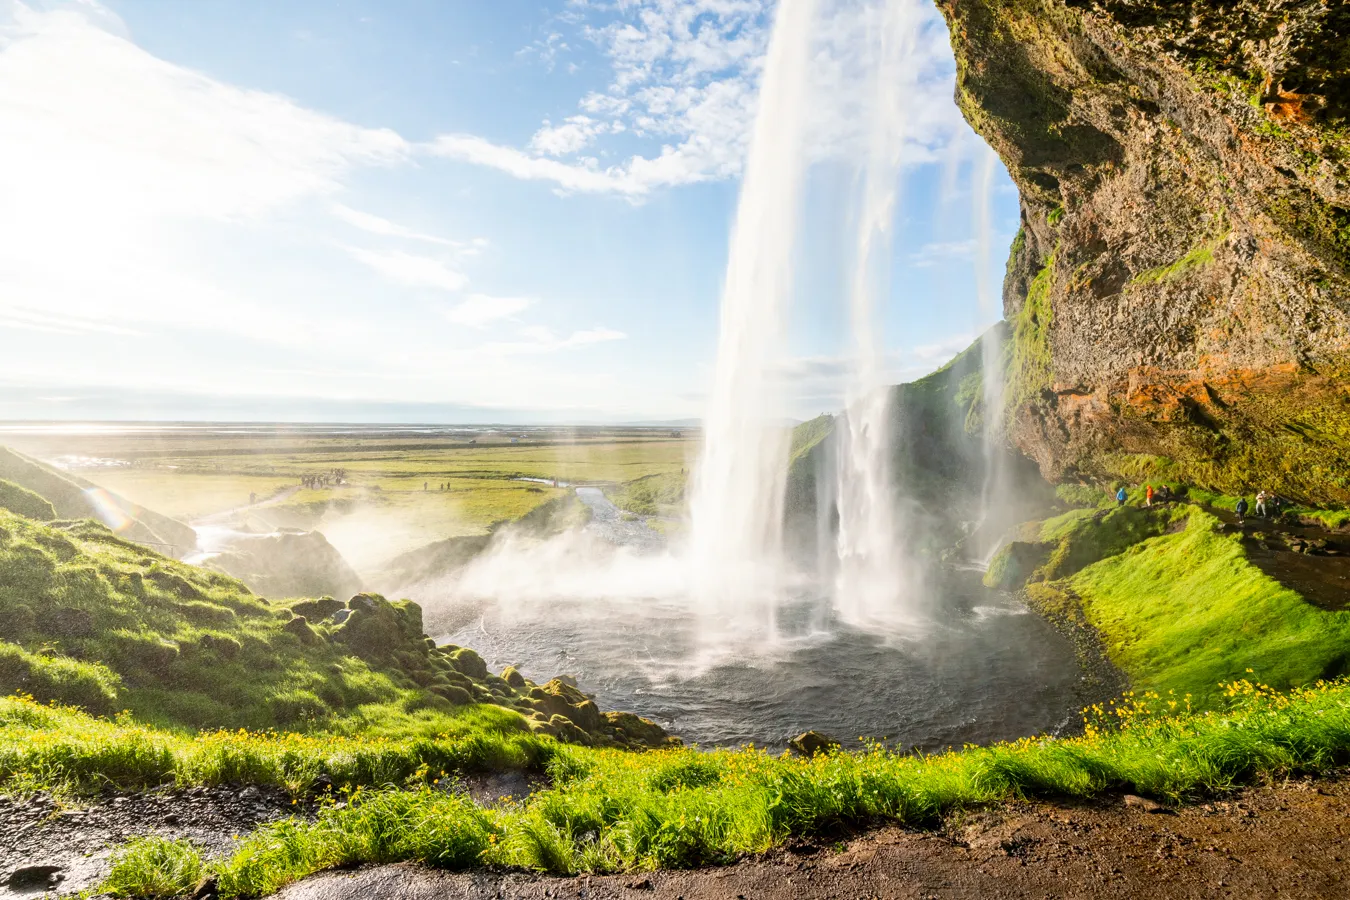 the iconic Seljalandsfoss in iceland, one of the best stops on a 10 days in iceland ring road trip itinerary